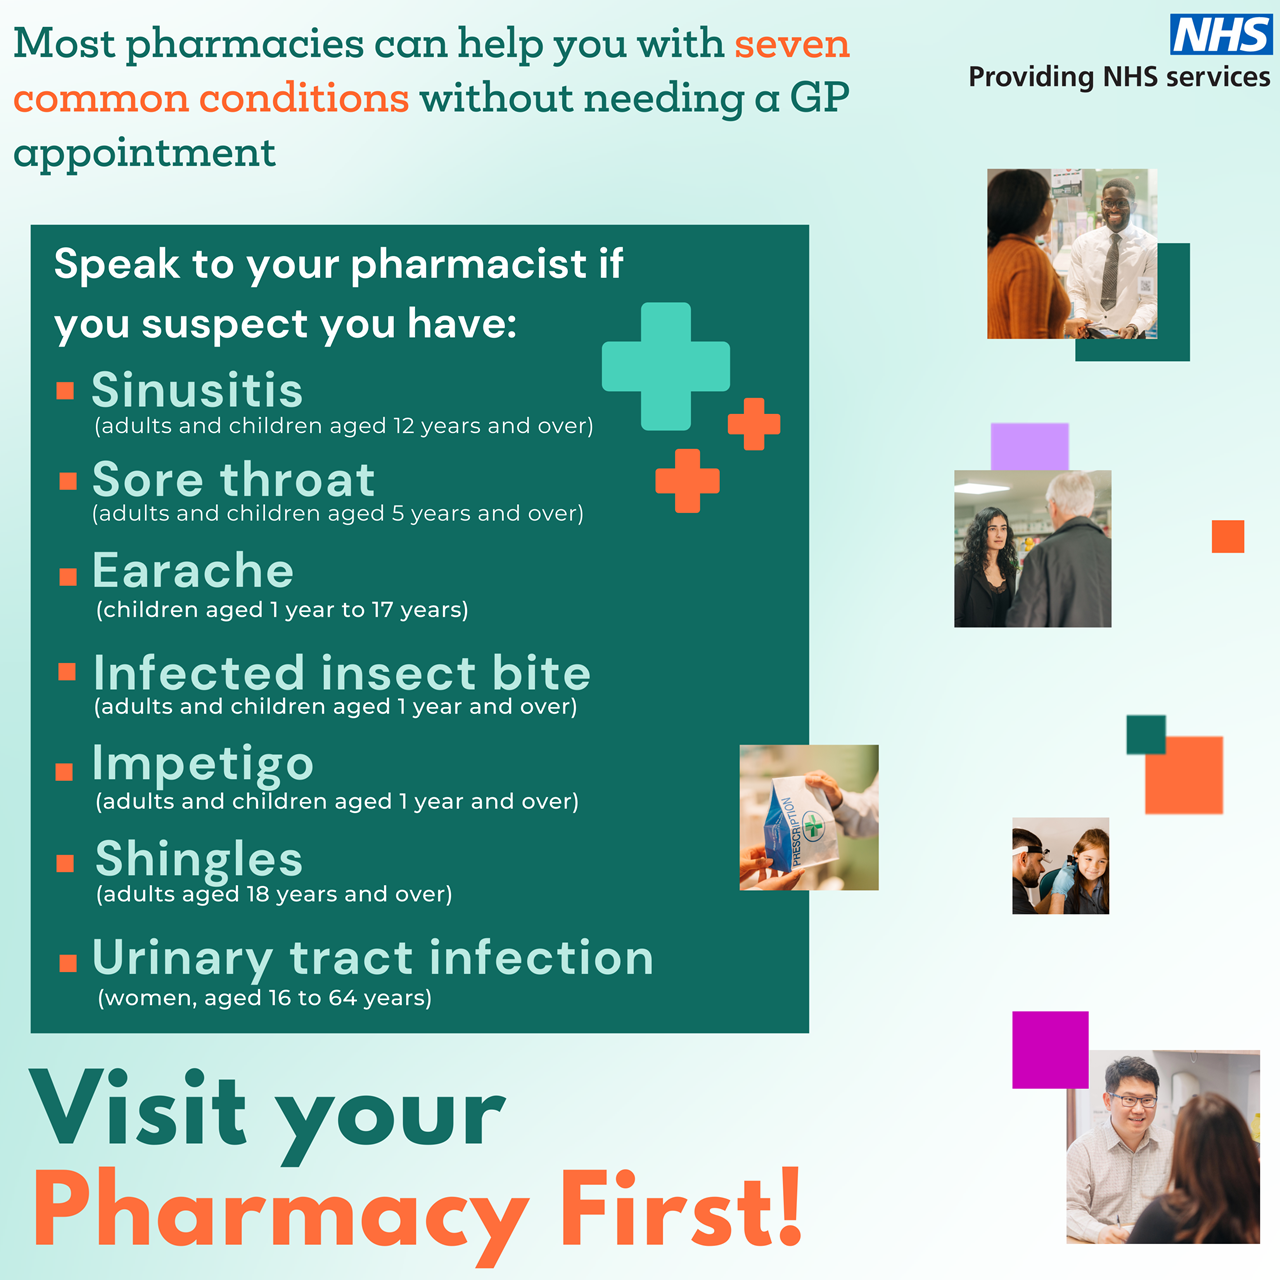 pharmacy first campaign